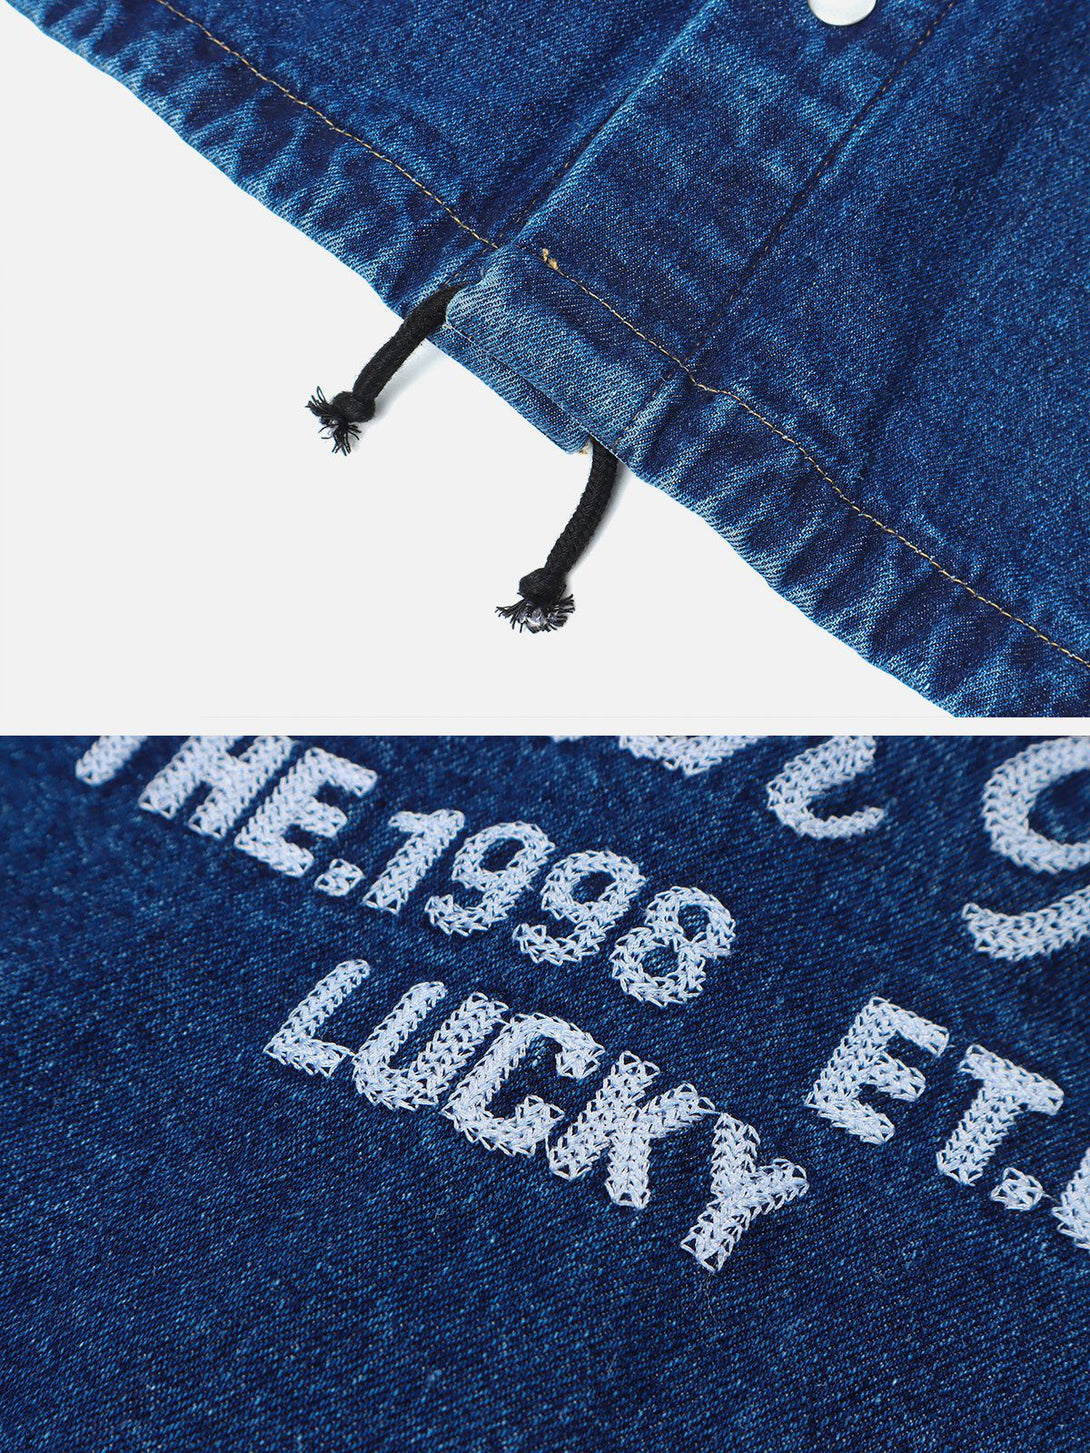 Majesda® - Lucky Number Embroidered Denim Jacket outfit ideas, streetwear fashion - majesda.com